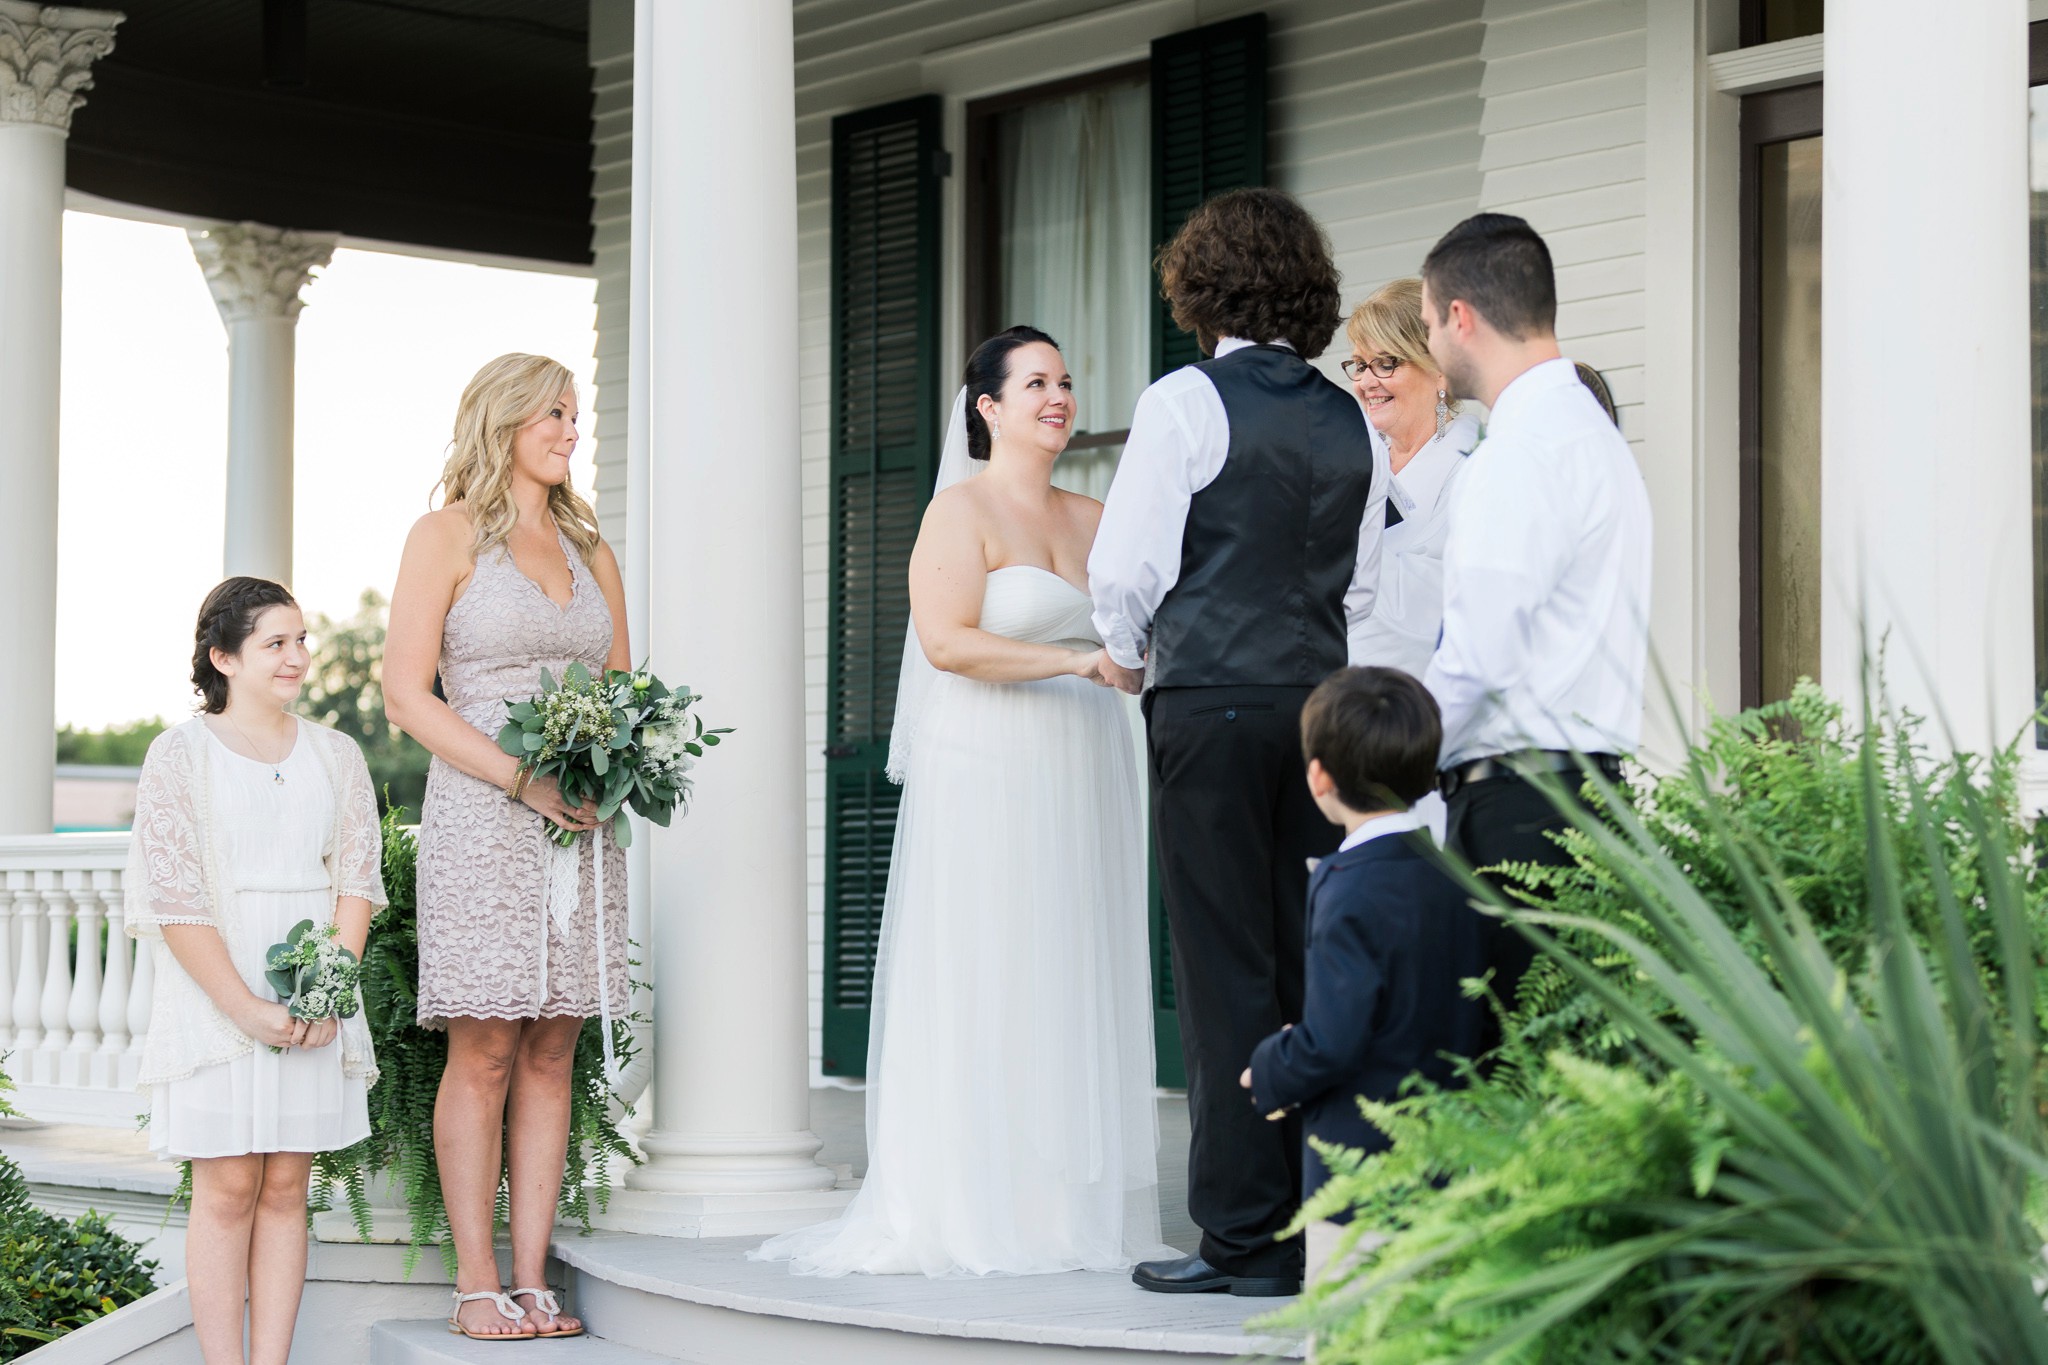 August wedding at the Redding House in Biloxi, Mississippi.